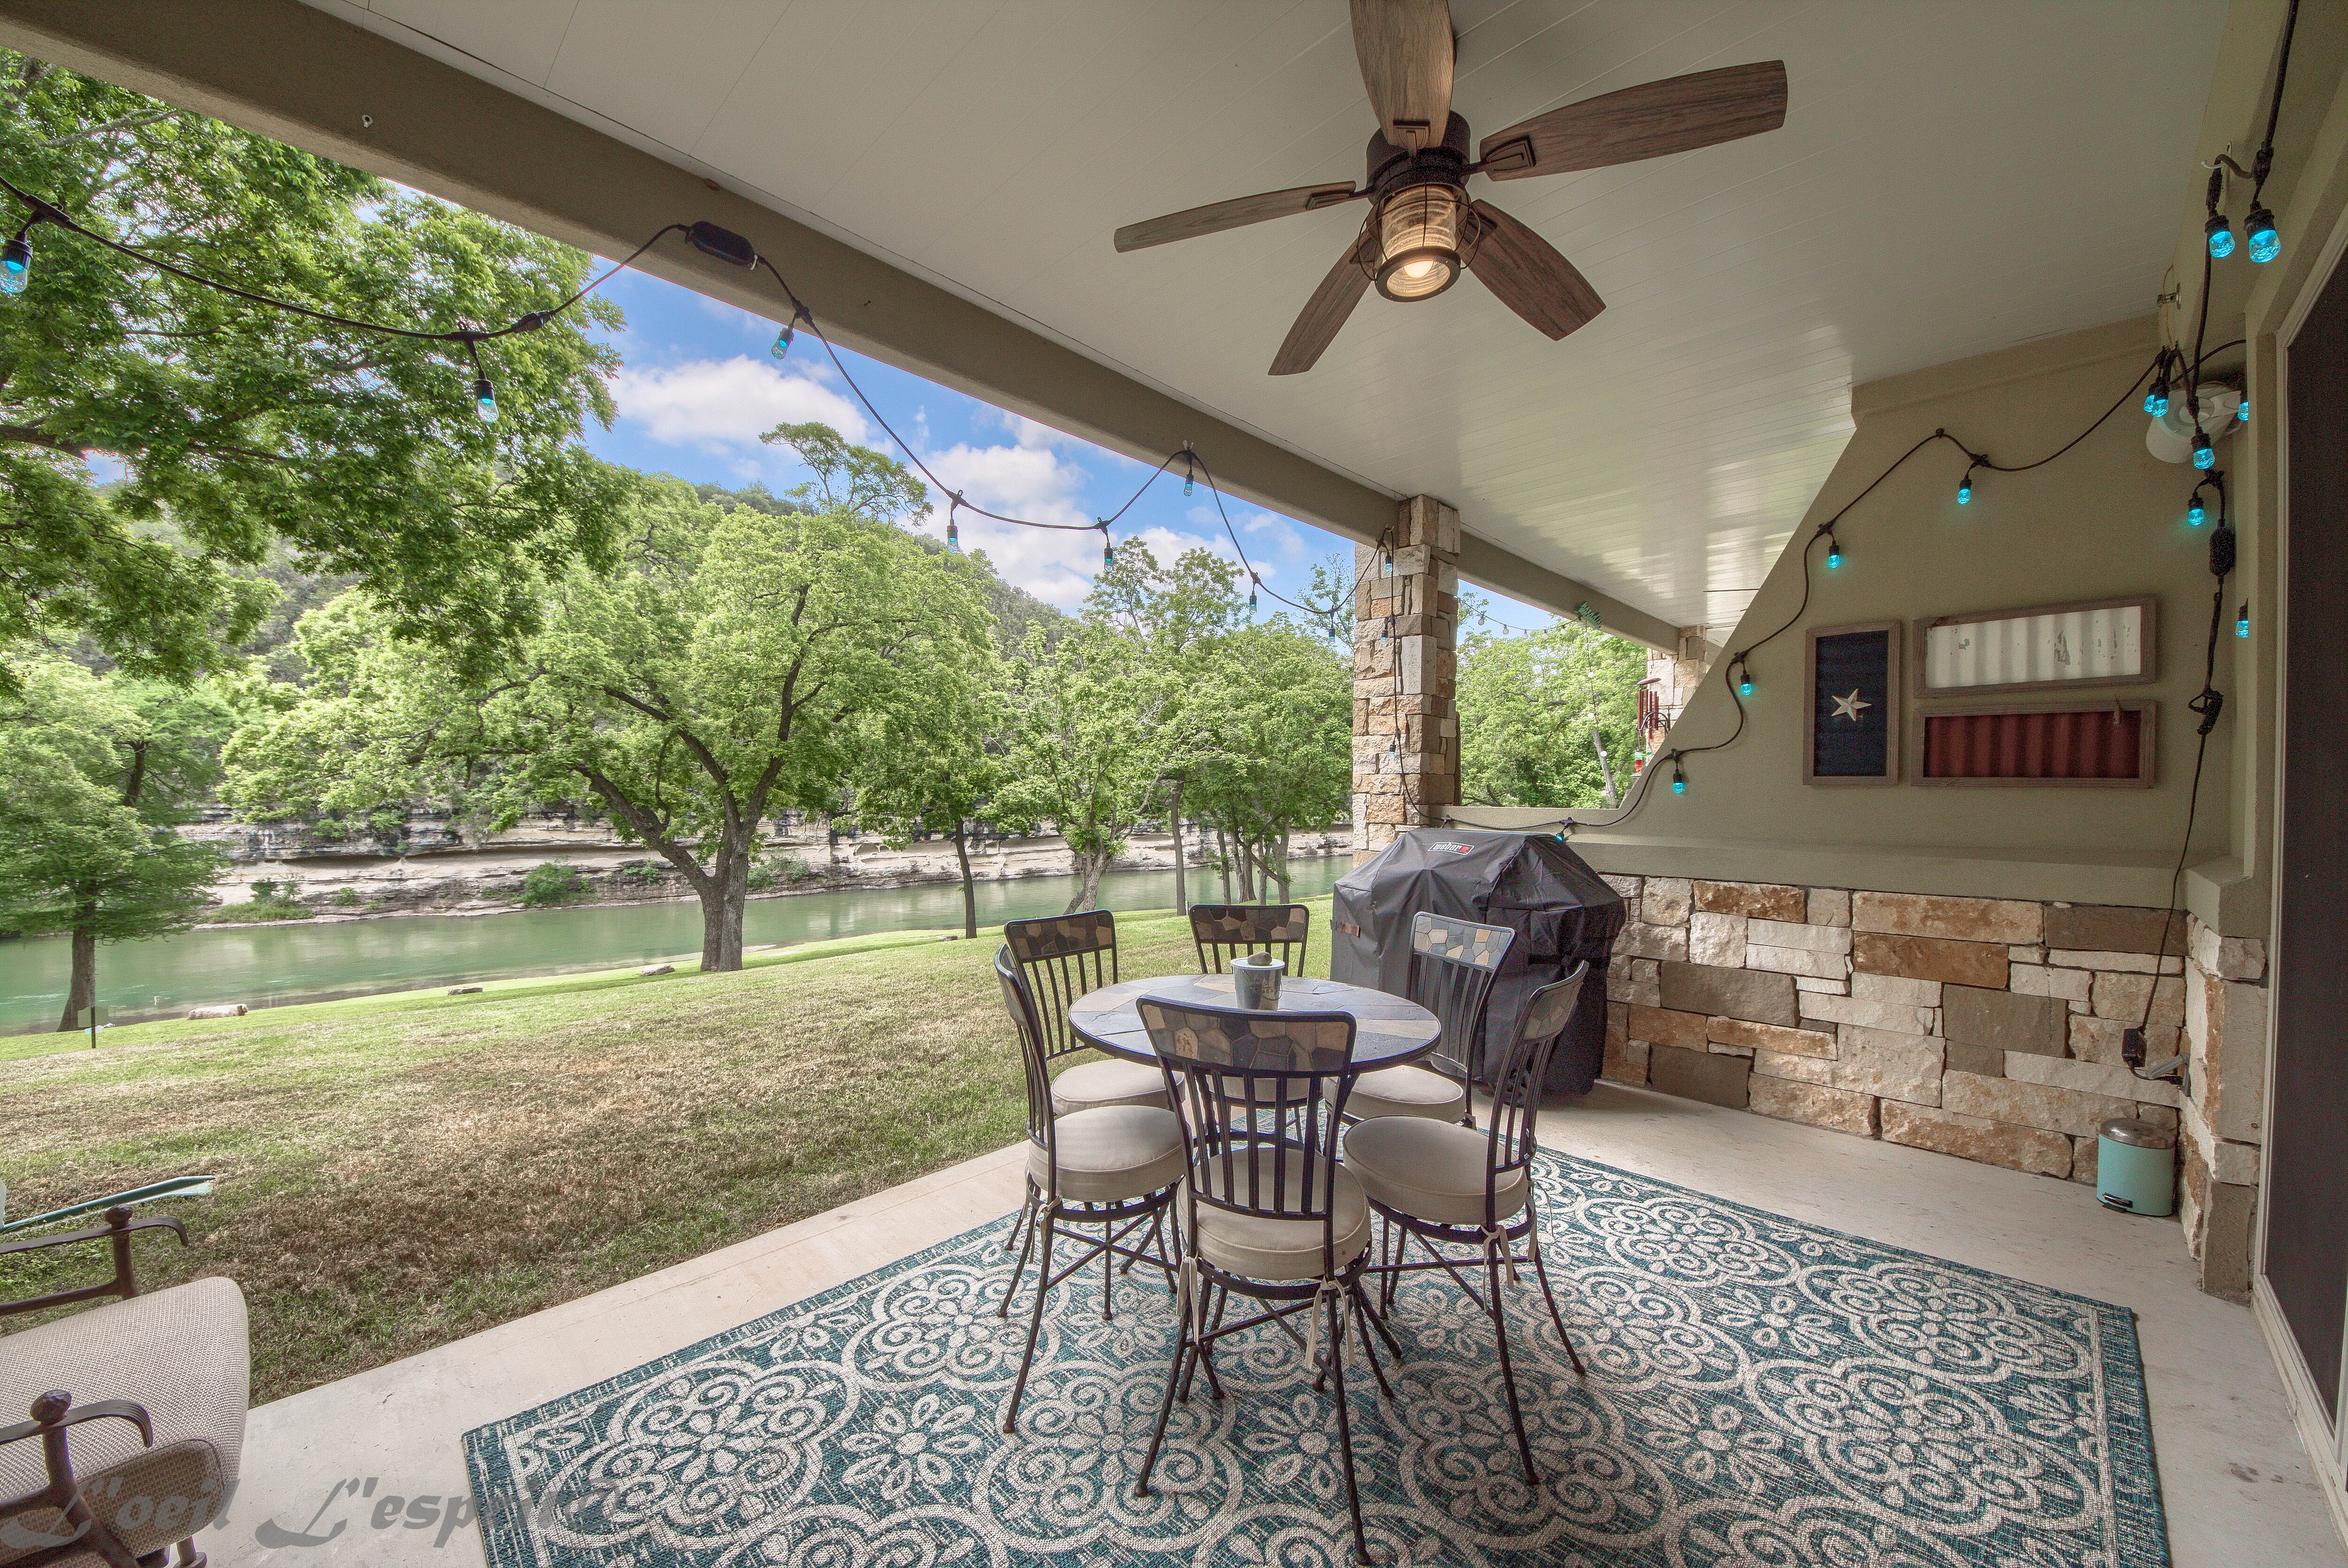  This first floor condo has a great patio